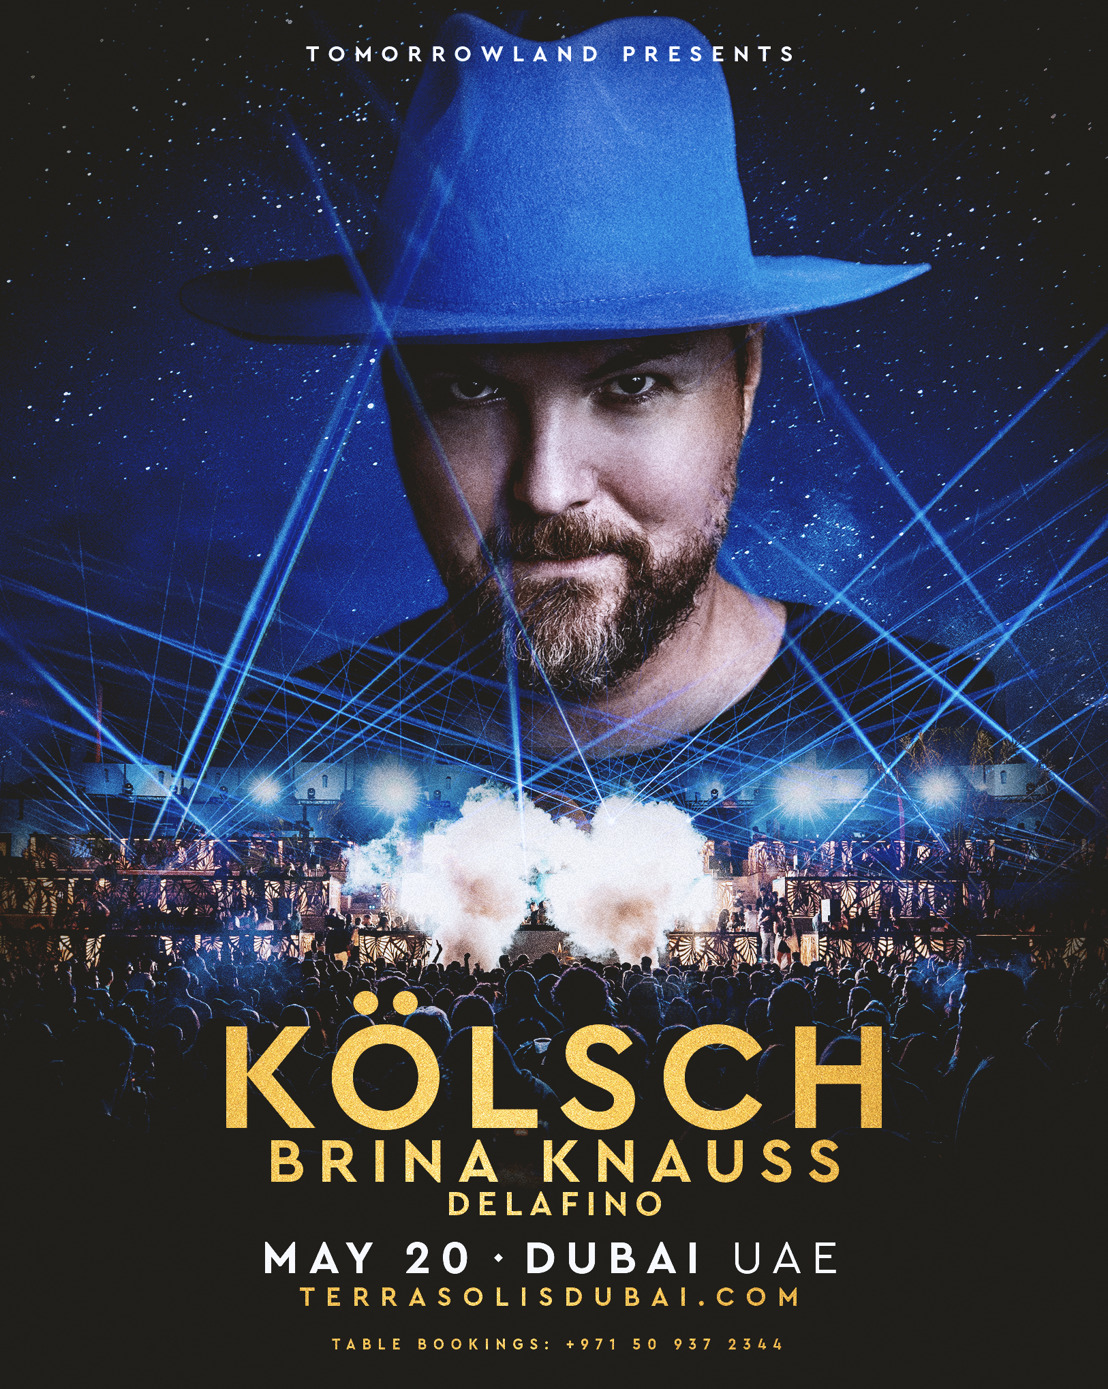 Kölsch takes the stage at Terra Solis Dubai for an unforgettable show